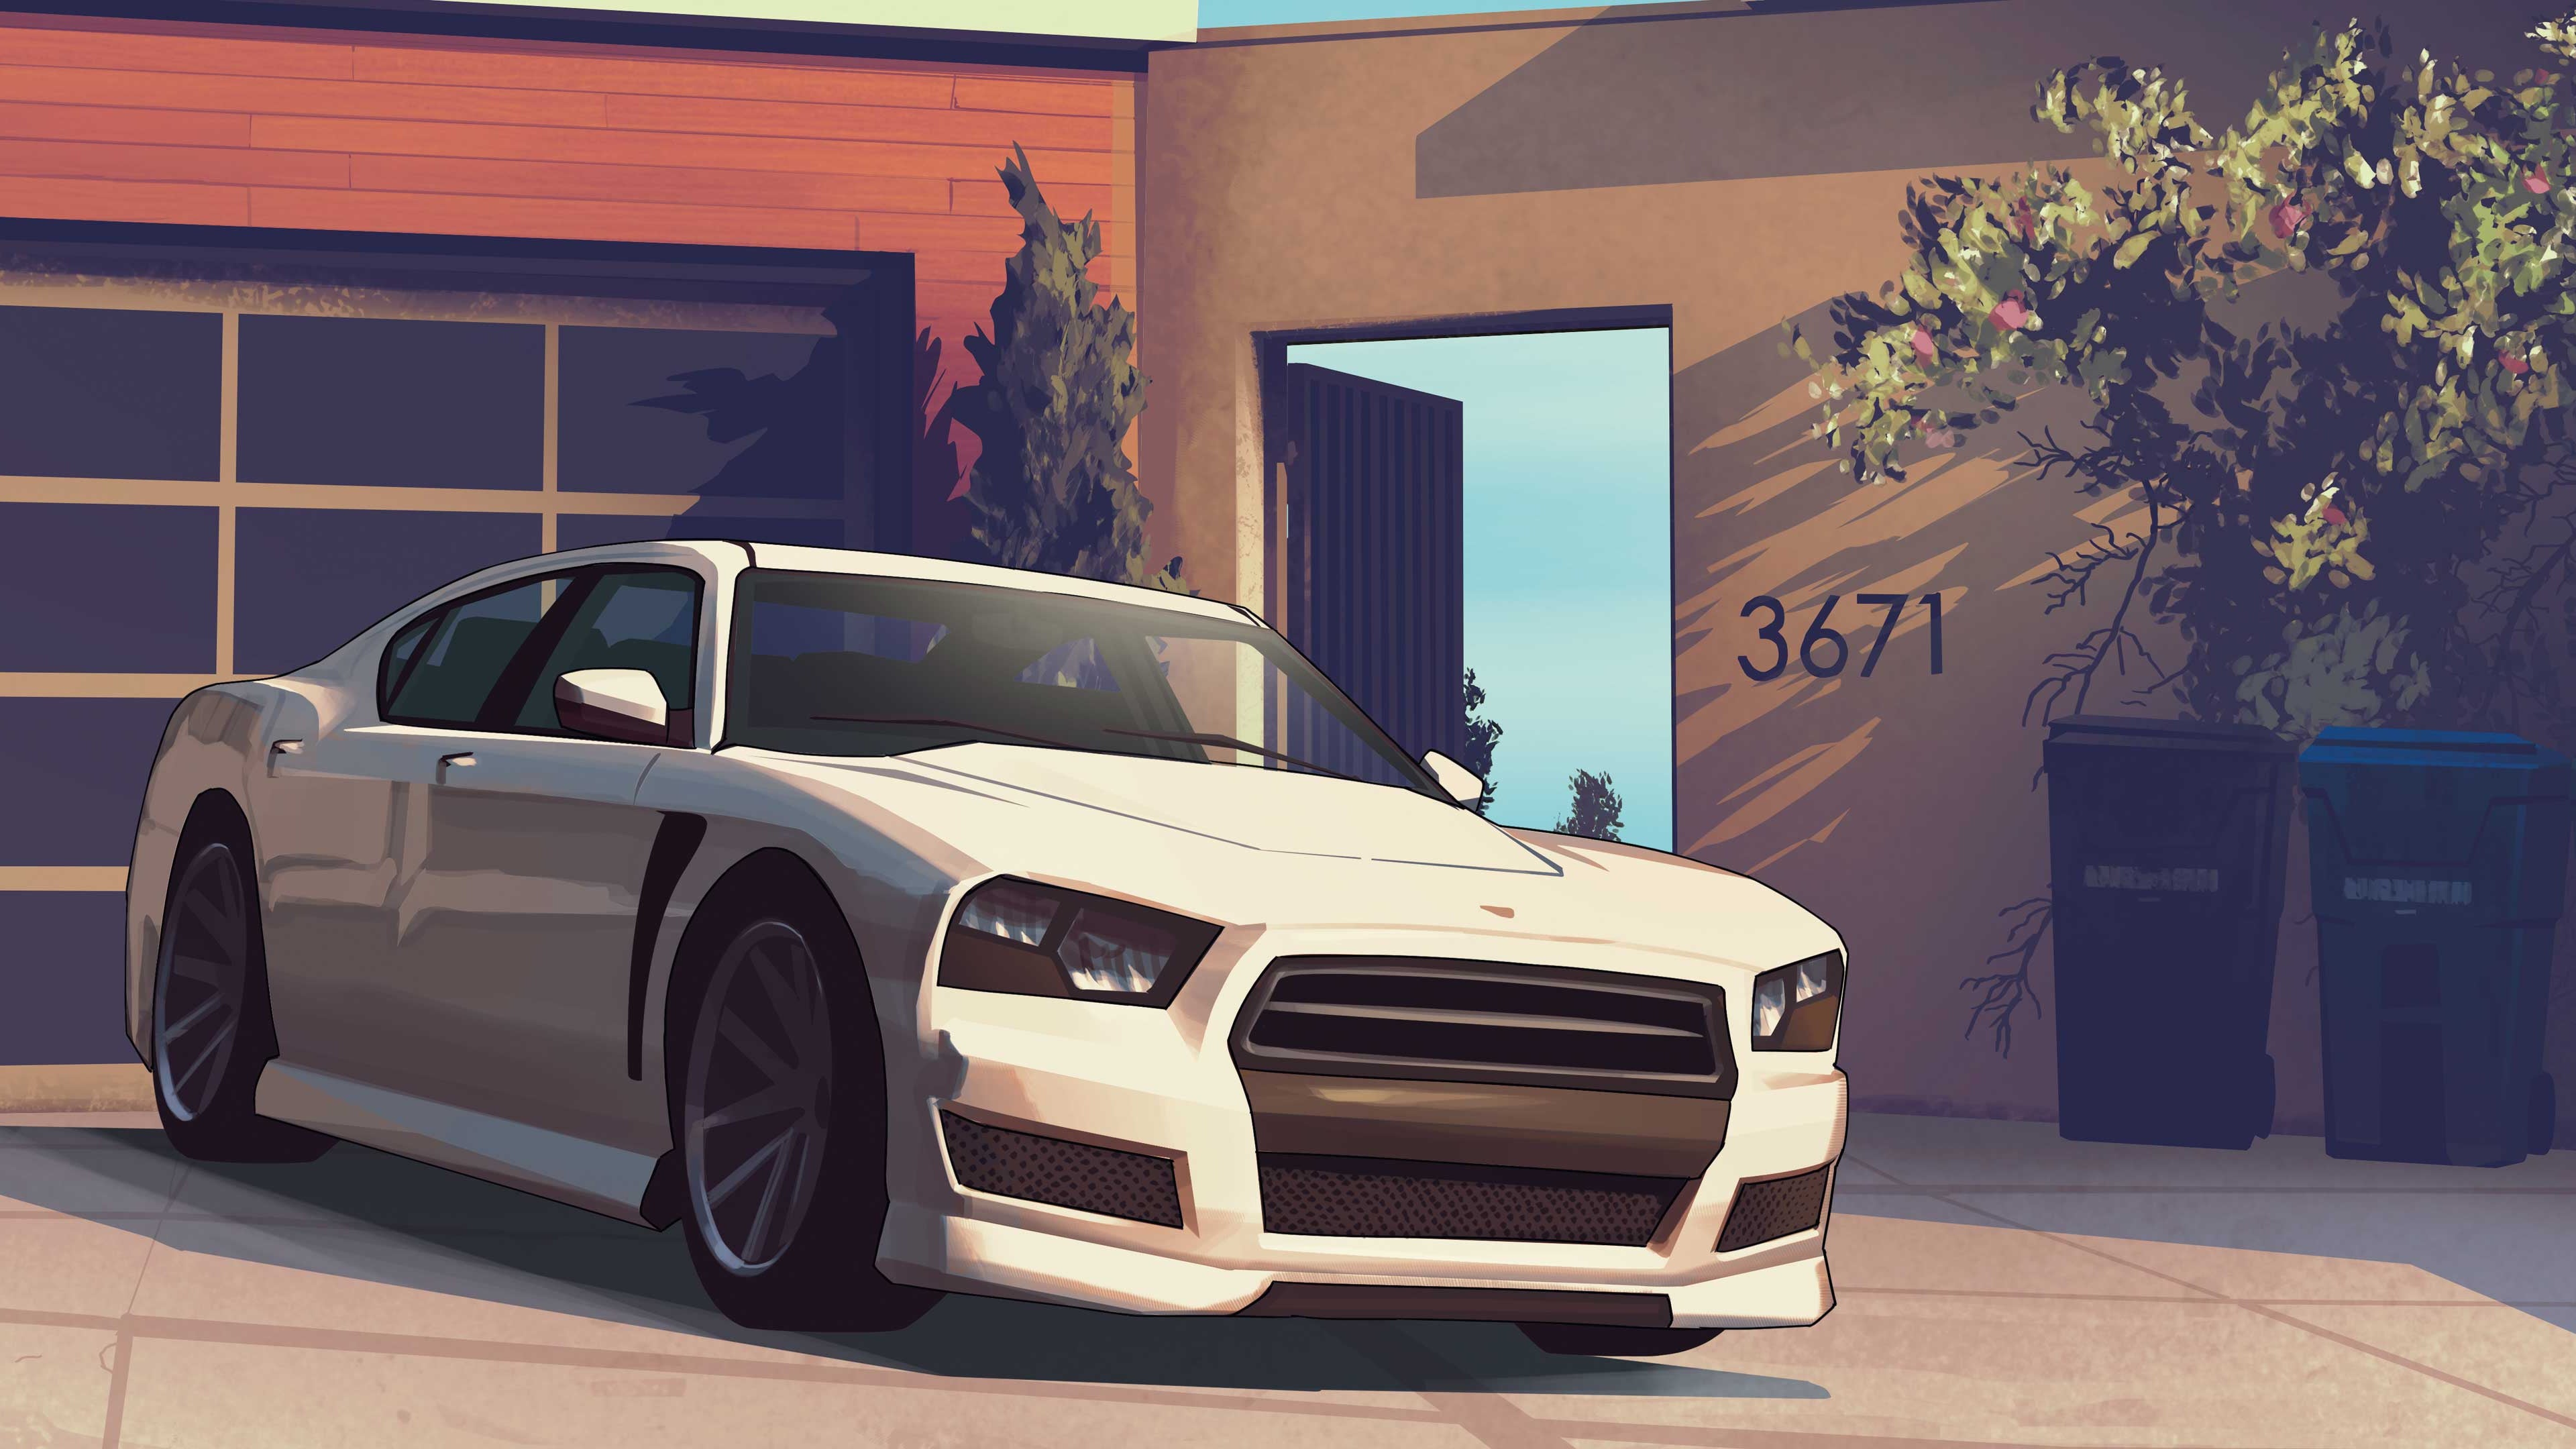 Image for This week's GTA Online Podium Car